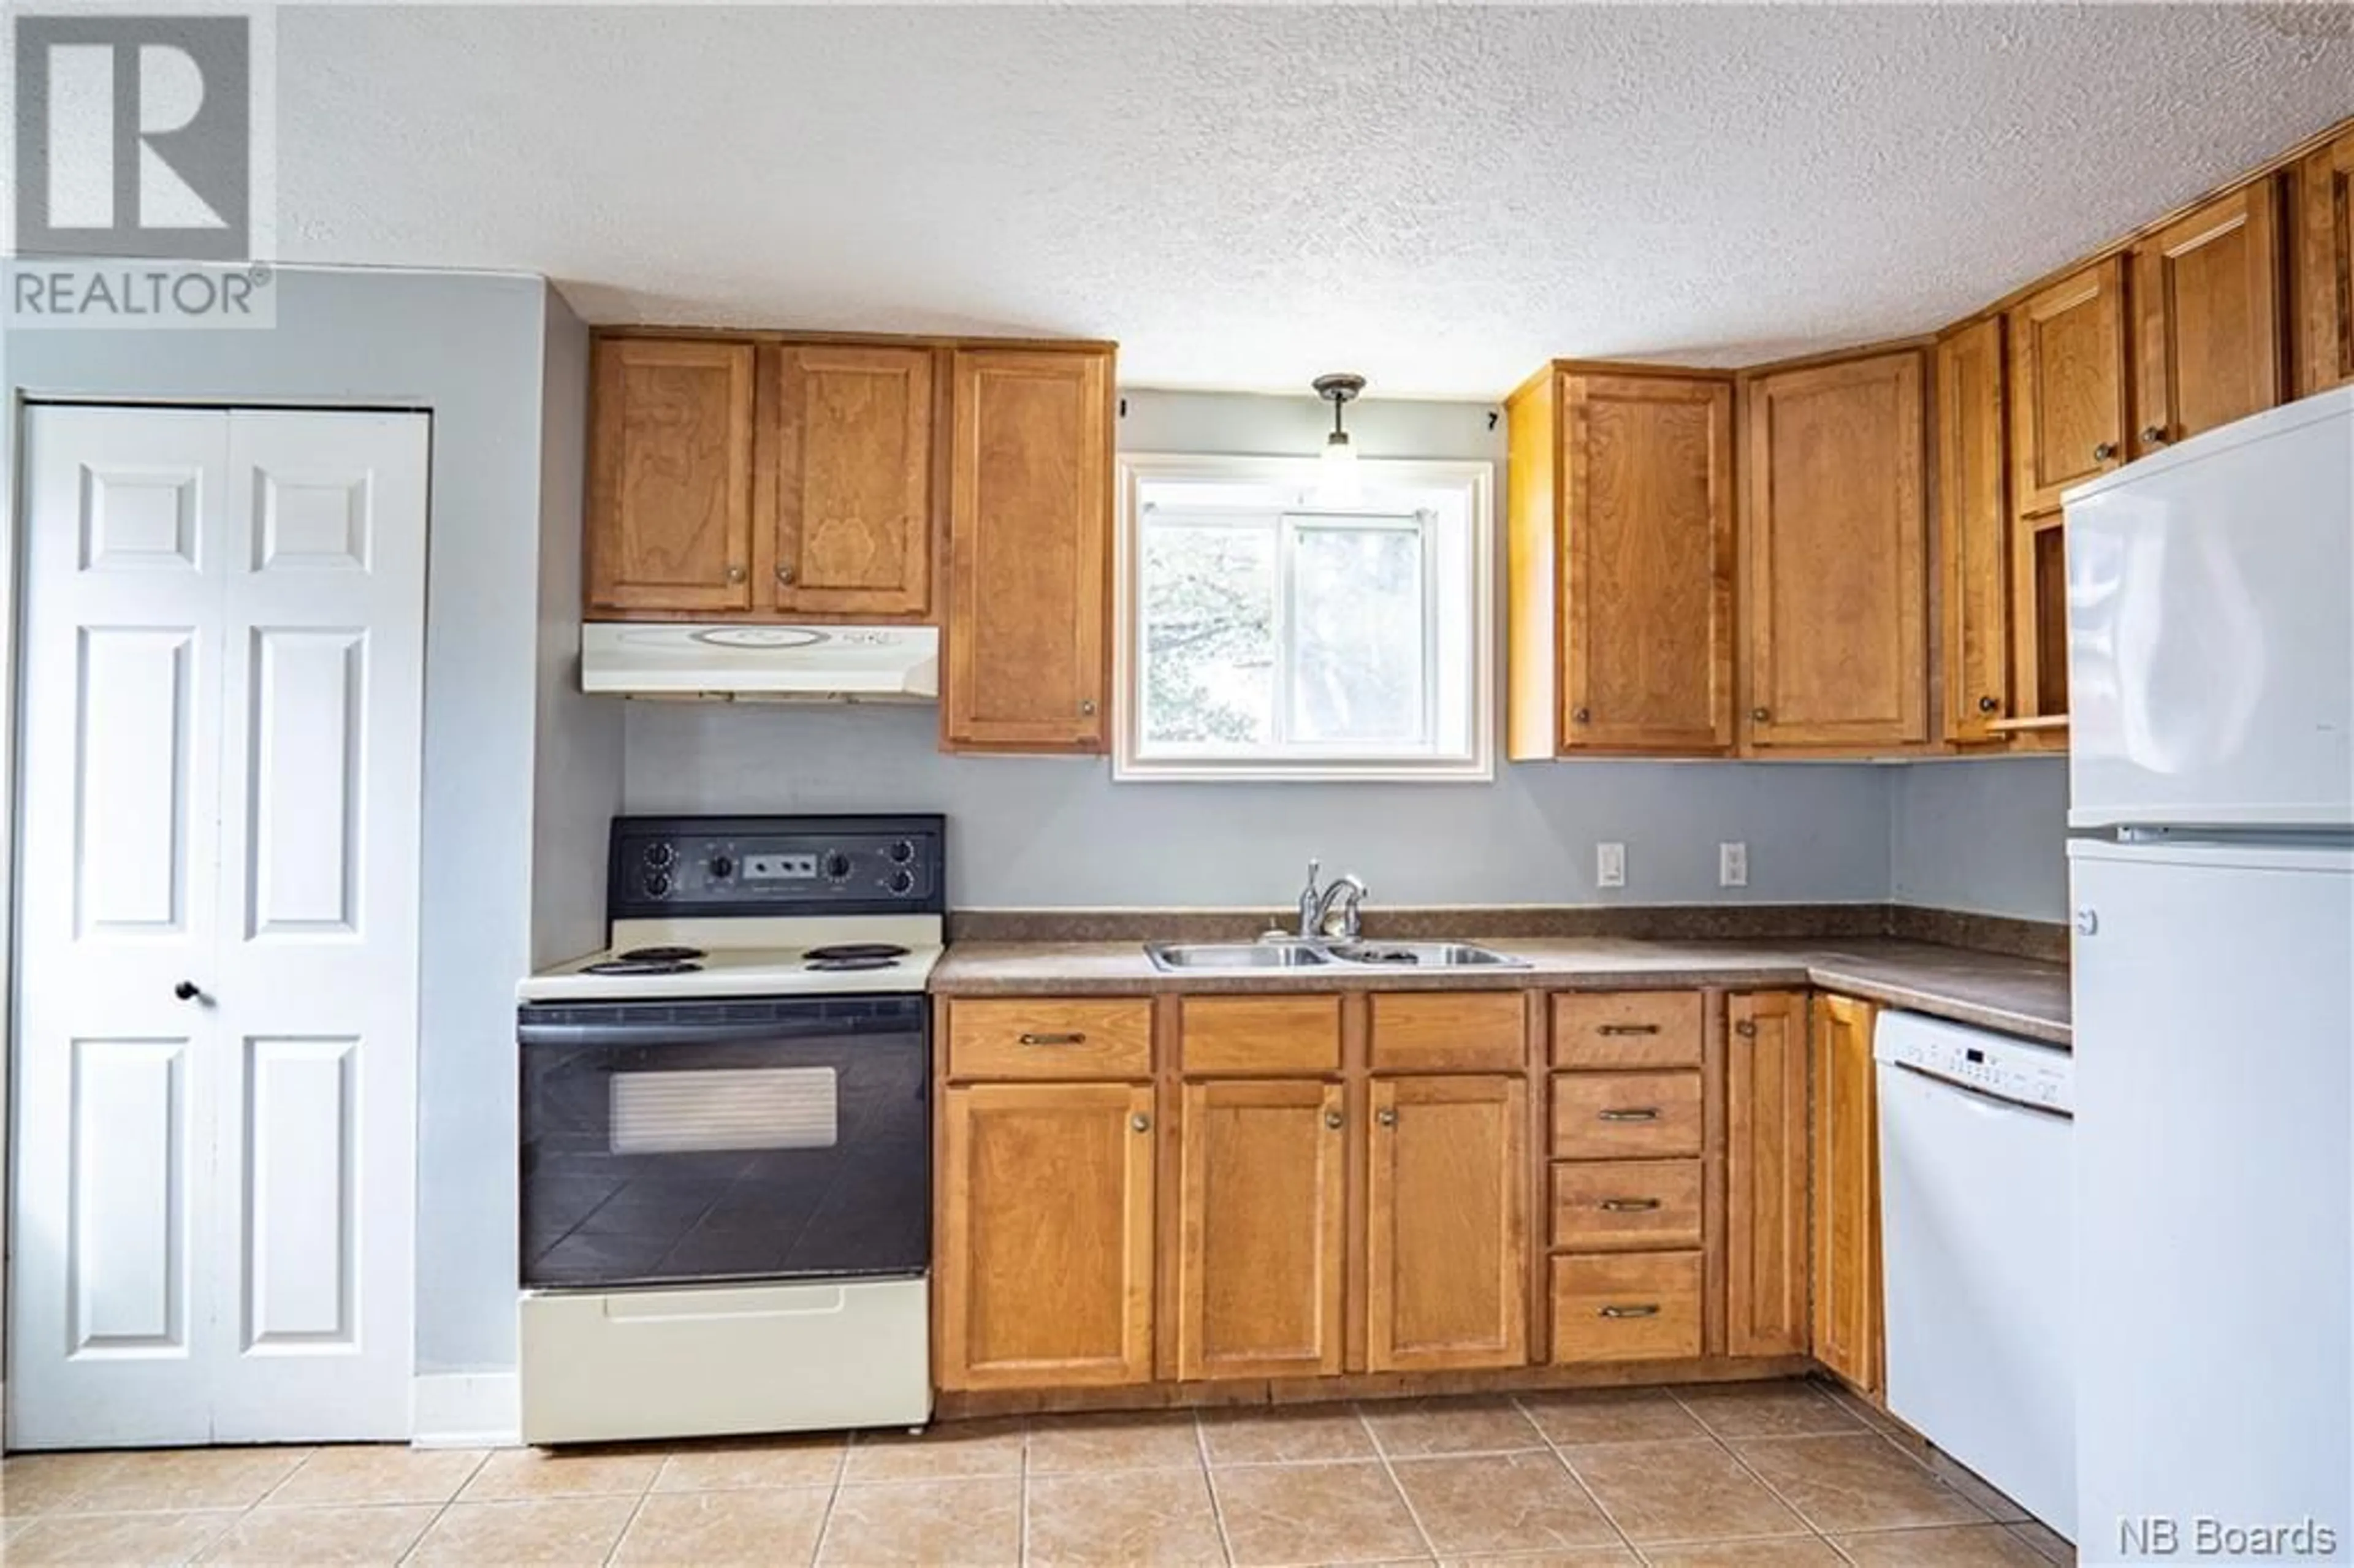 Standard kitchen for 16 McLeod Hill Road, Fredericton New Brunswick E3A4W9